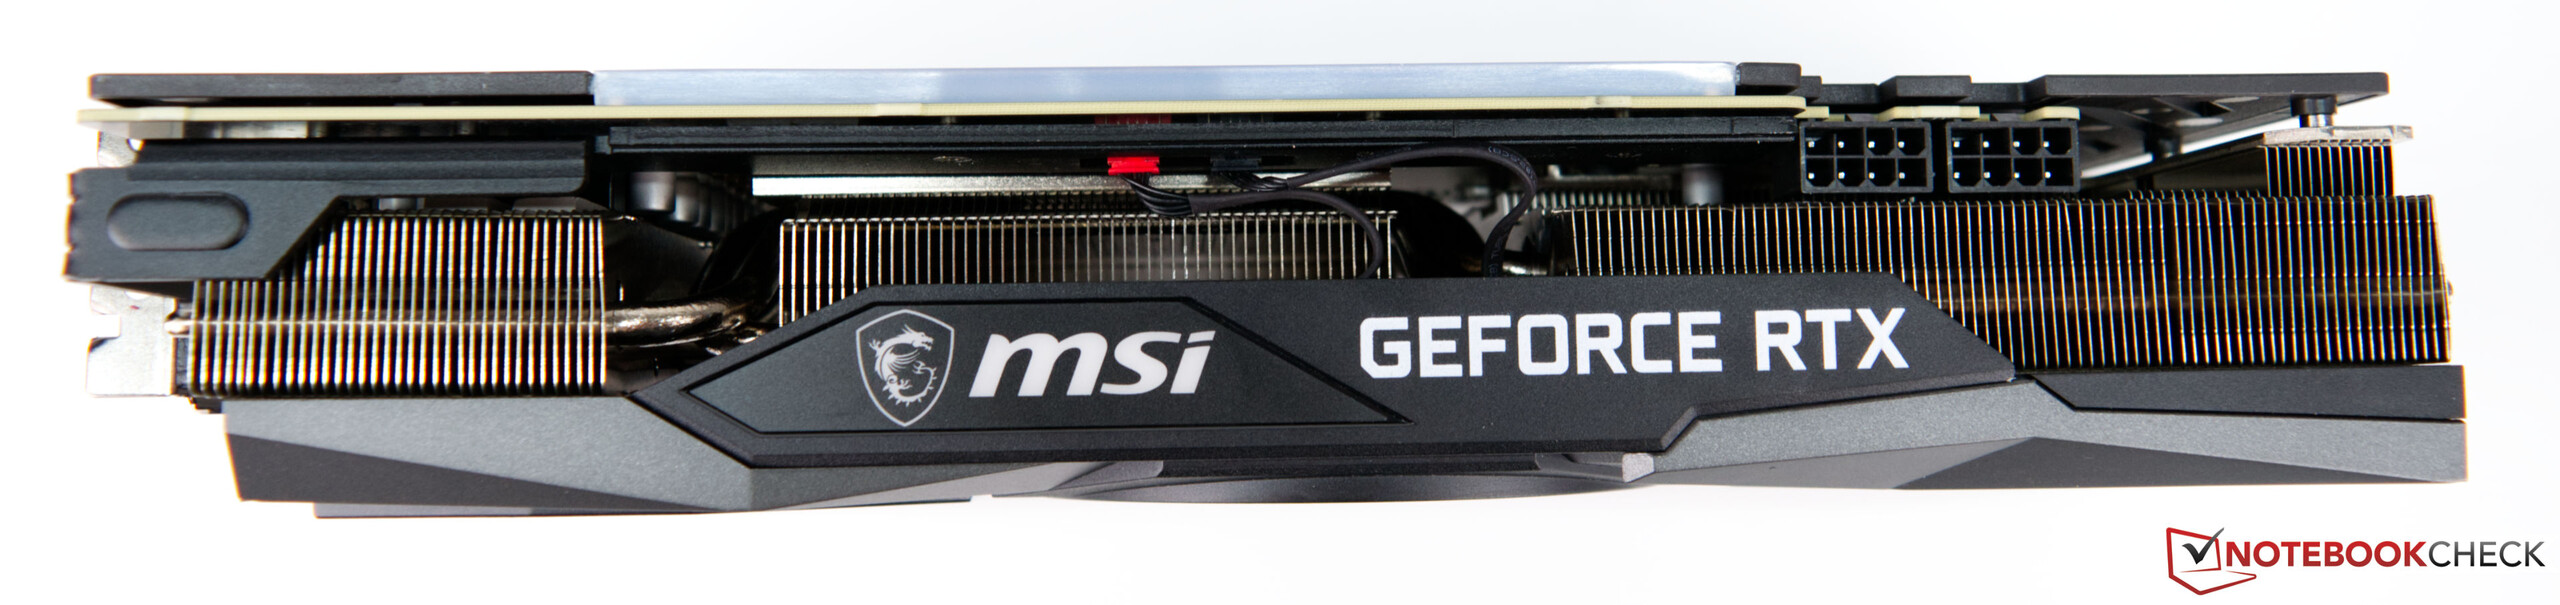 MSI GeForce RTX 3070 Gaming X Trio desktop graphics card in review 